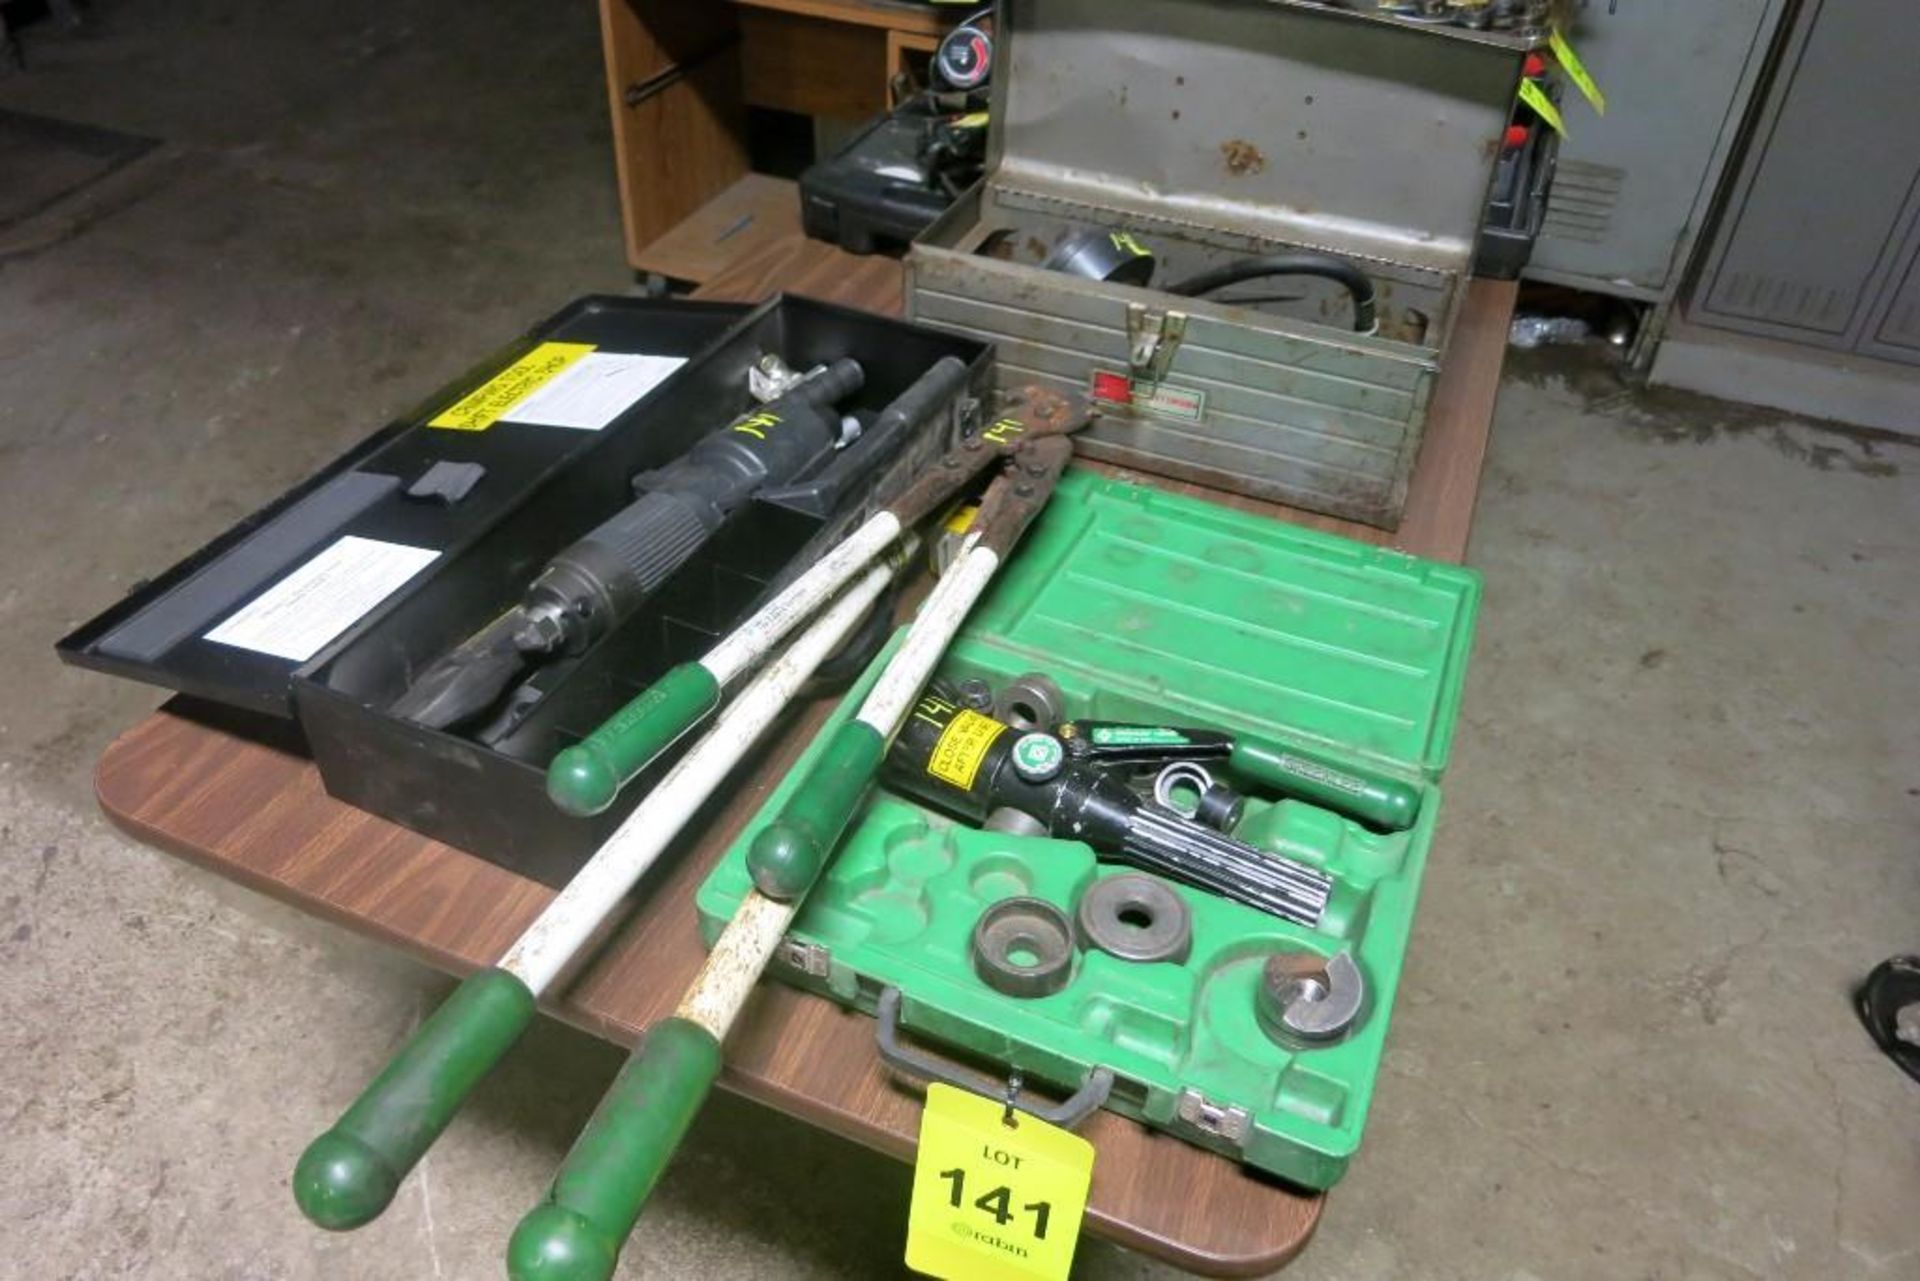 [Lot] Hydraulic tools (1) crimper, (2) knockouts, (1) pump, (2) cable cutters